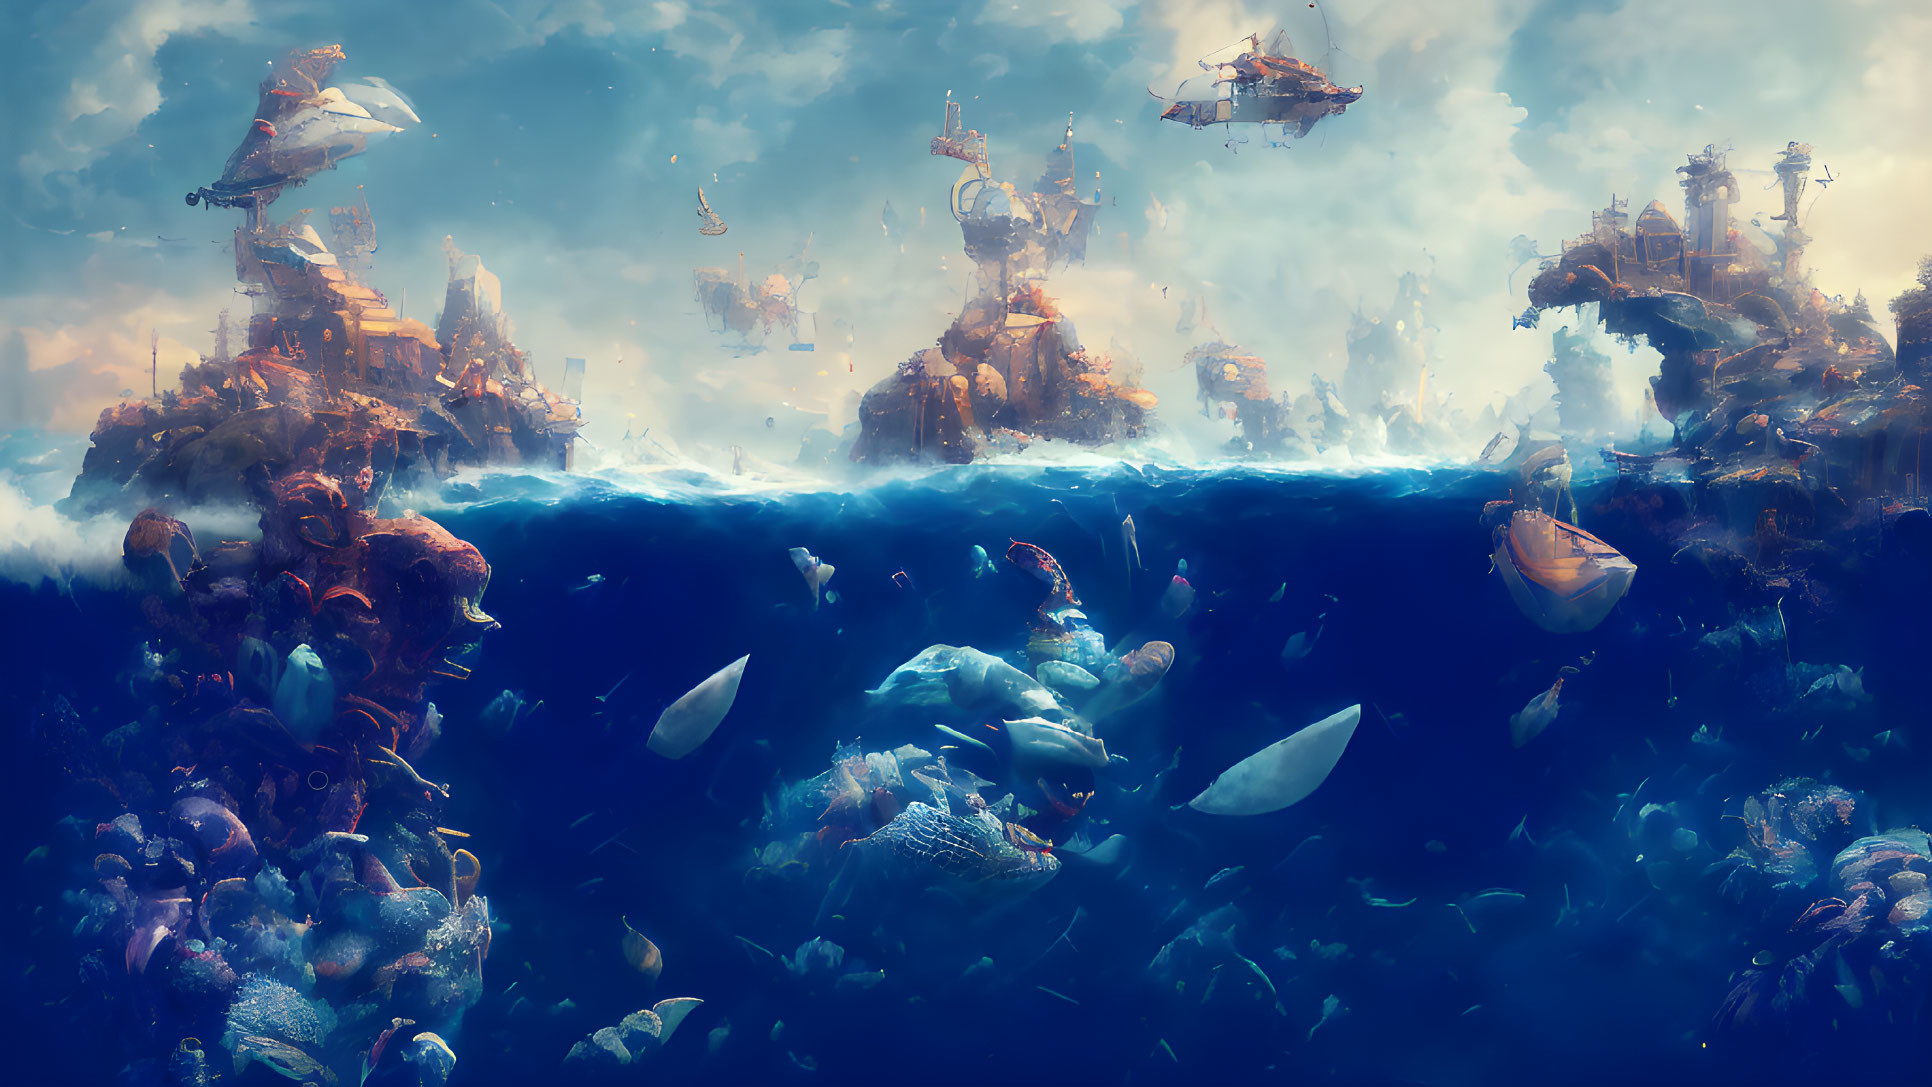 Fantastical seascape with floating islands and marine life under a blue sky